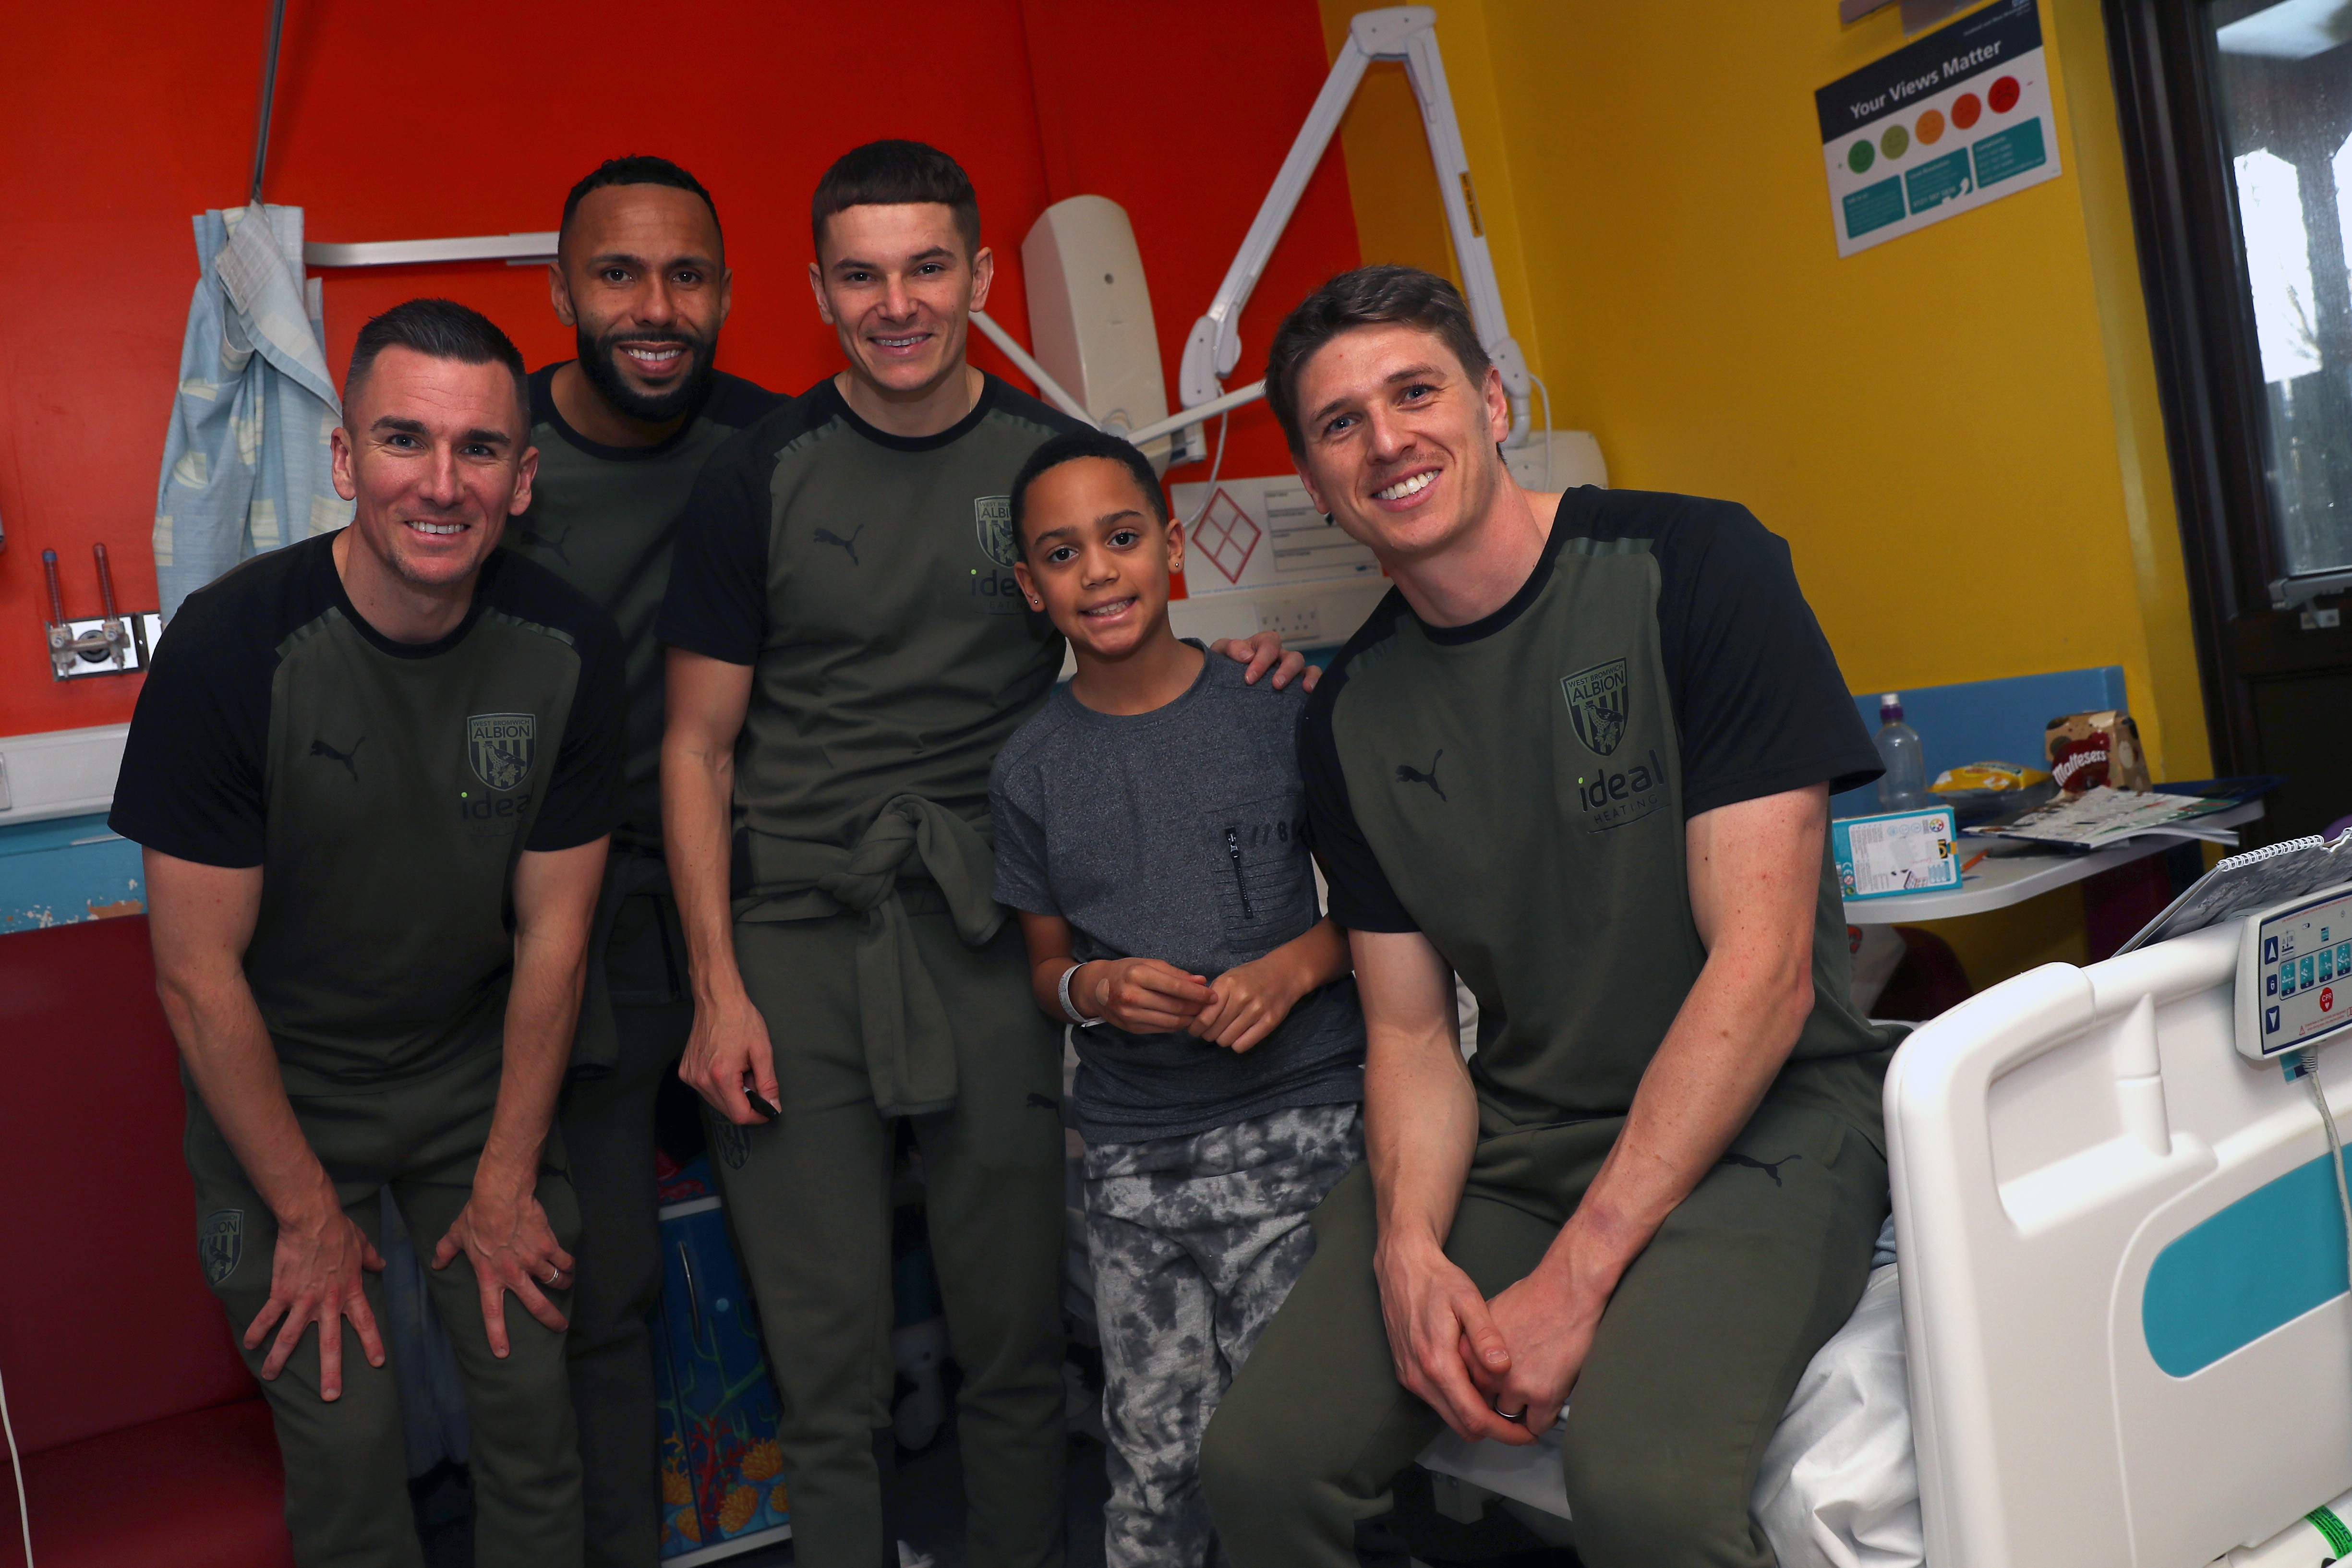 Jed Wallace, Adam Reach, Kyle Bartley and Conor Townsend pose for a photo with patients at Sandwell General Hospital